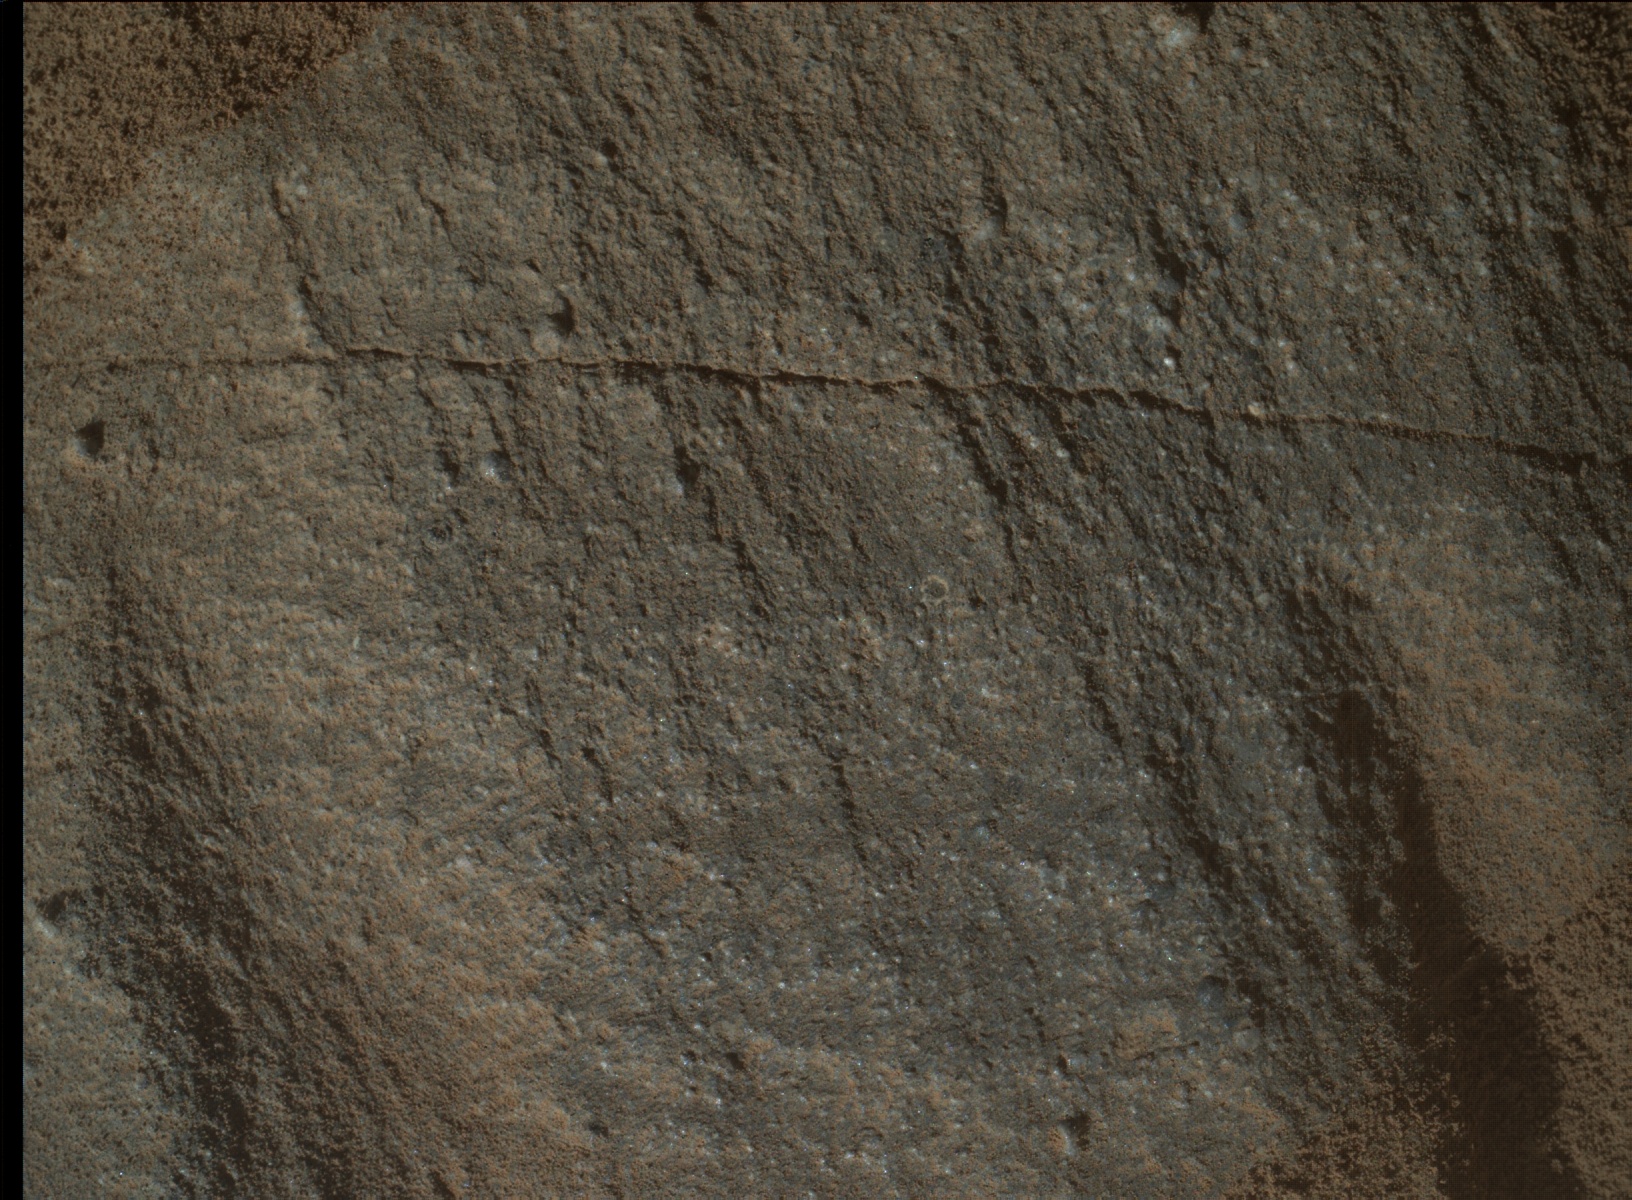 Nasa's Mars rover Curiosity acquired this image using its Mars Hand Lens Imager (MAHLI) on Sol 1318